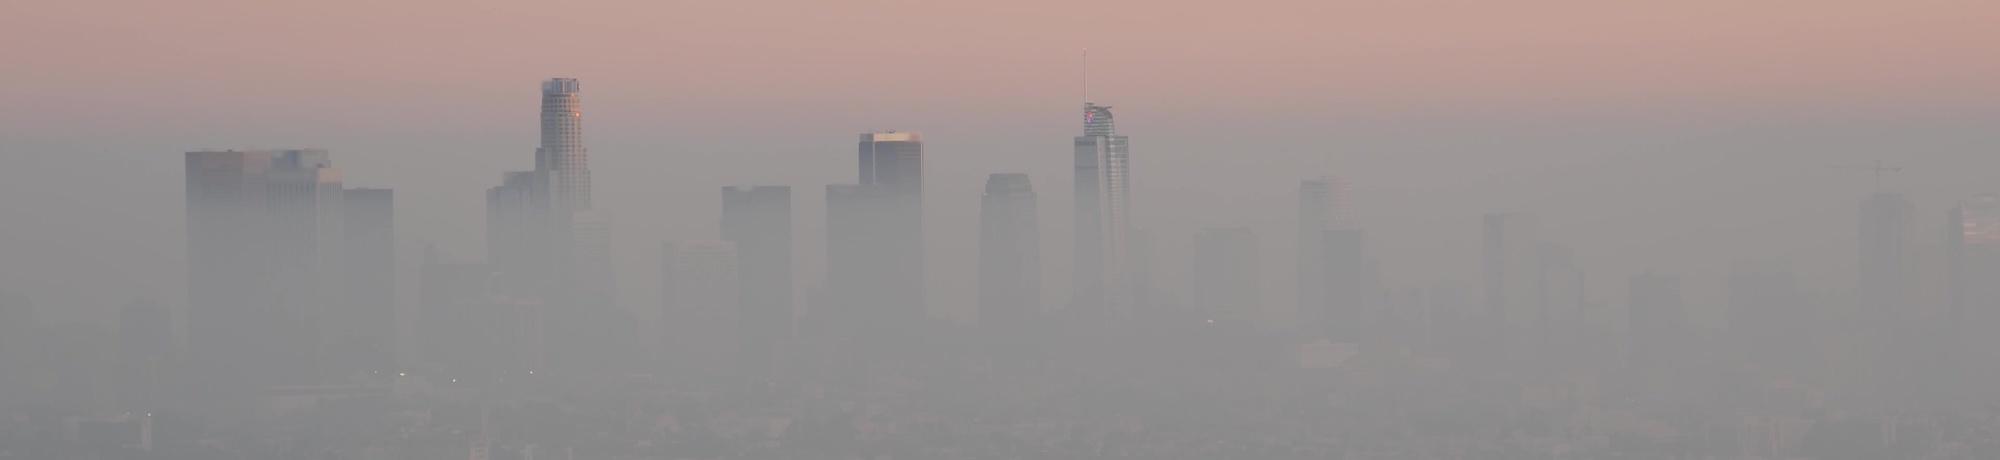 Air pollution in Los Angeles